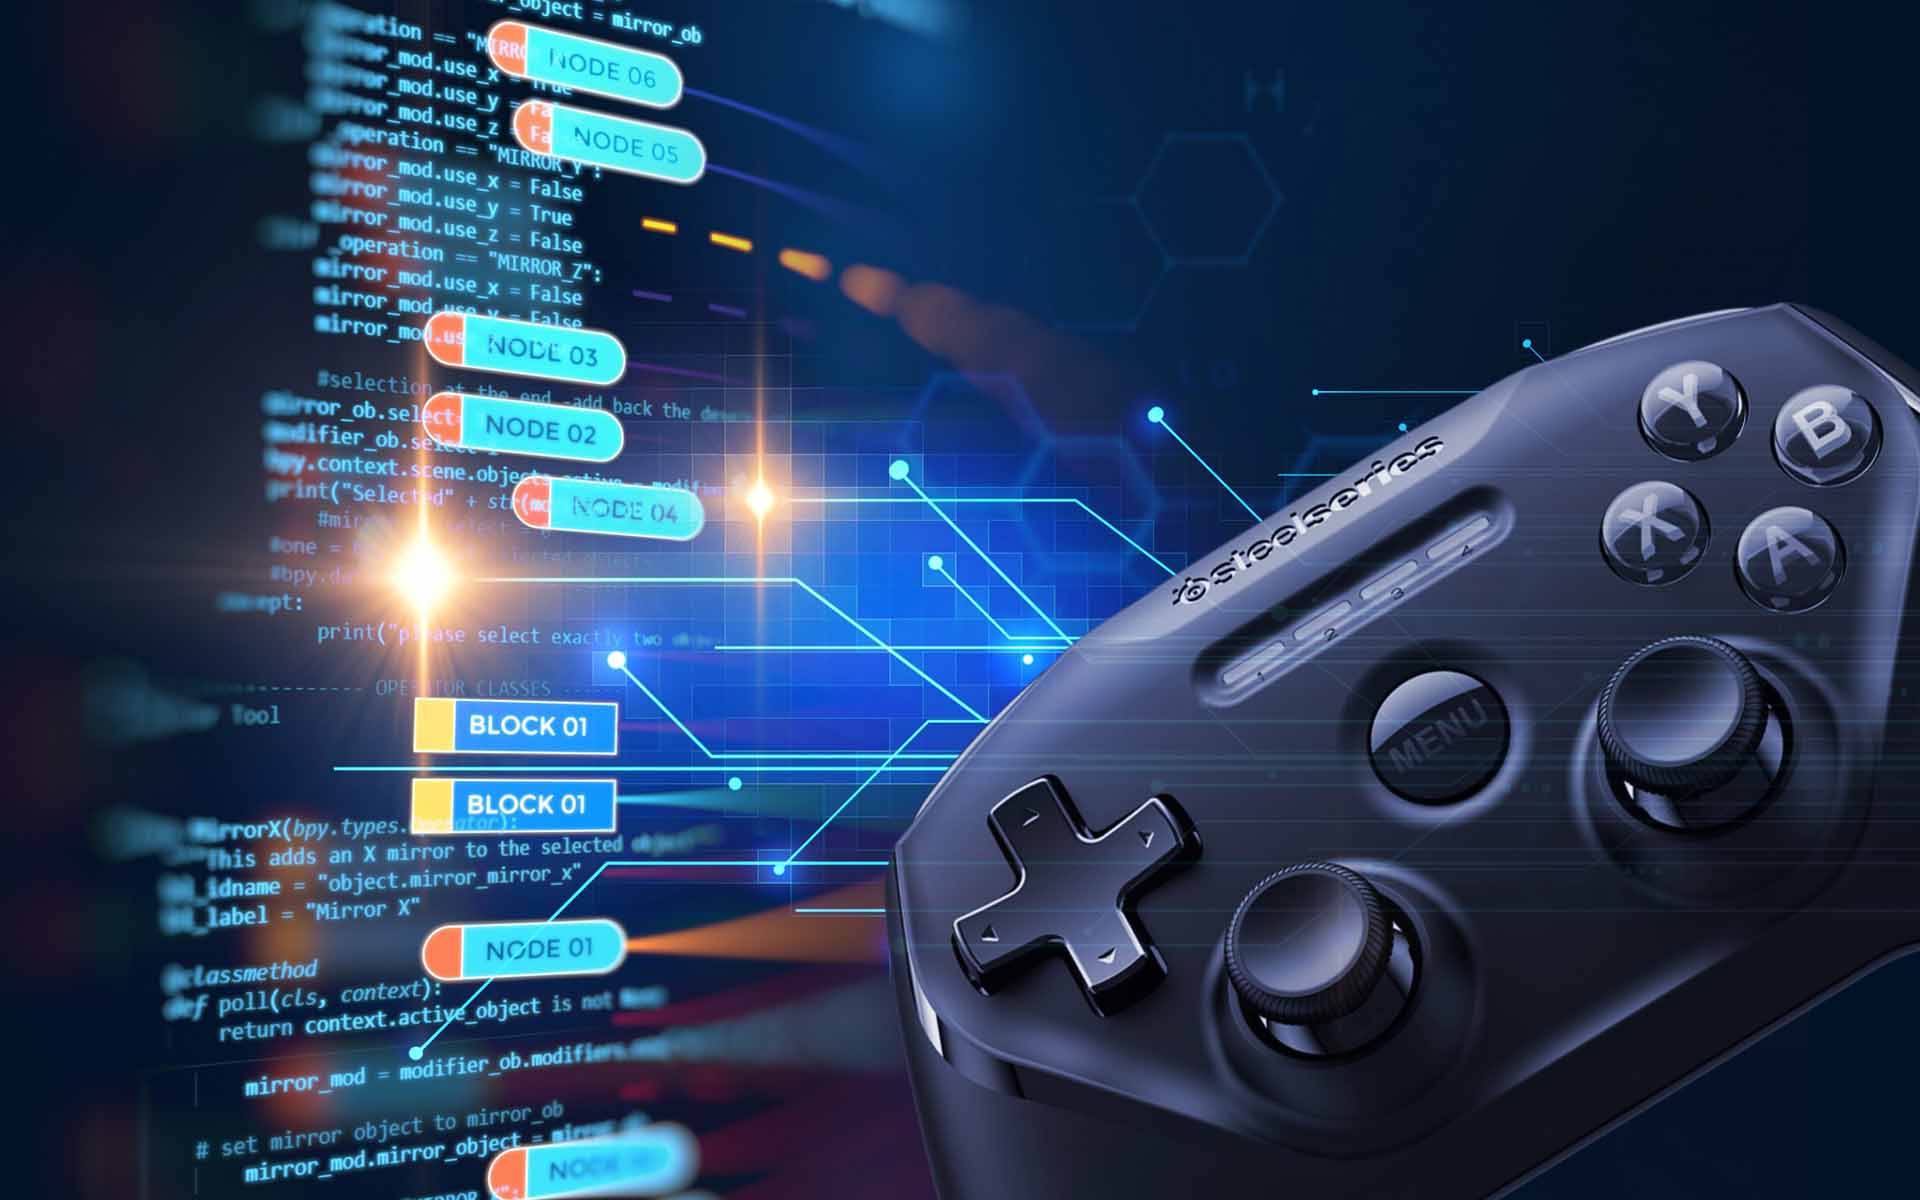 Institutional Support Rallies Behind Exeedme’s Blockchain-based Gaming Innovation